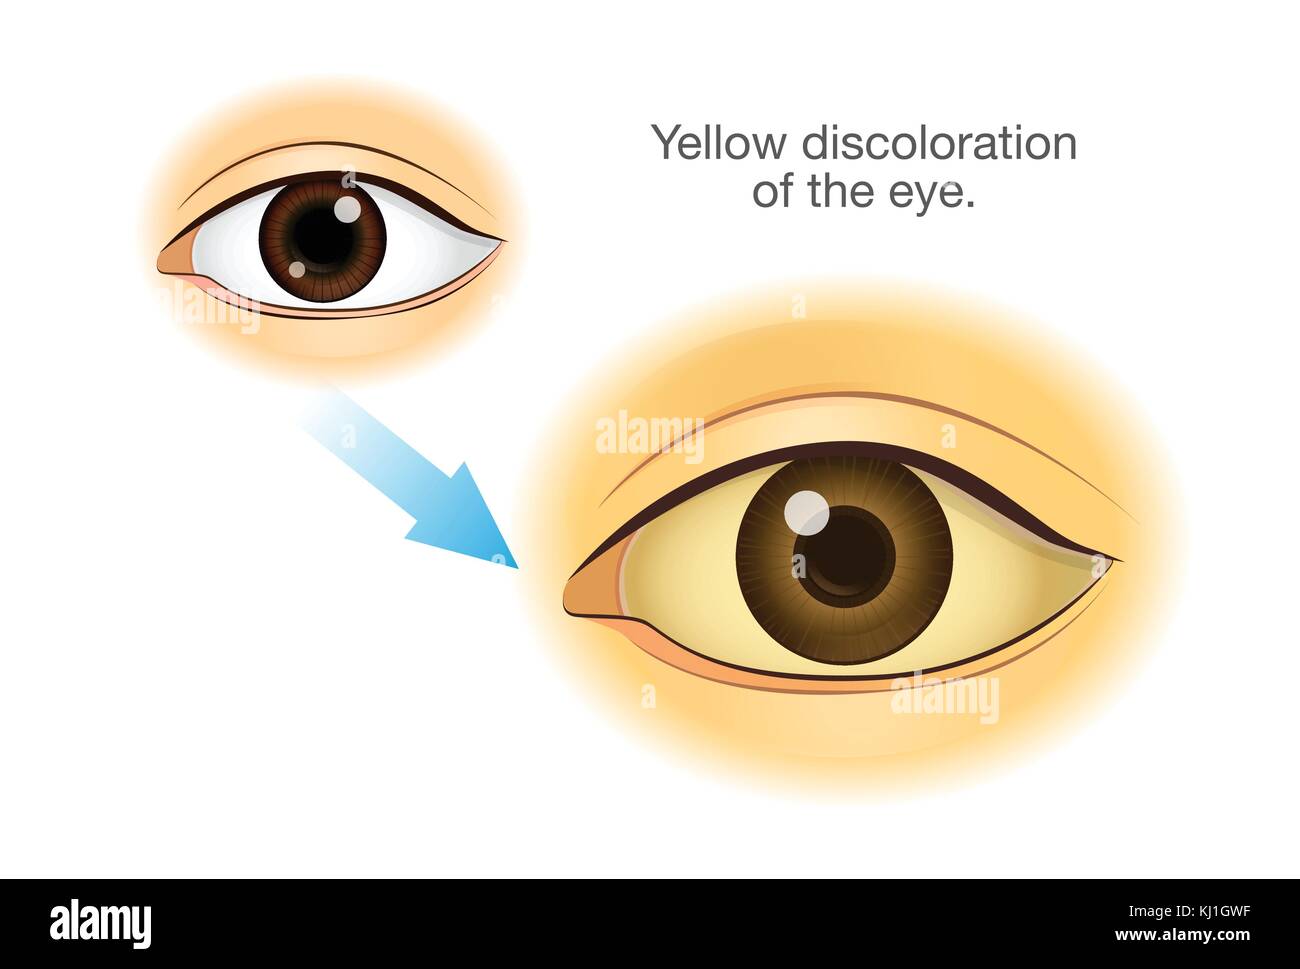 Normal human eye changing to Yellowing. Stock Vector